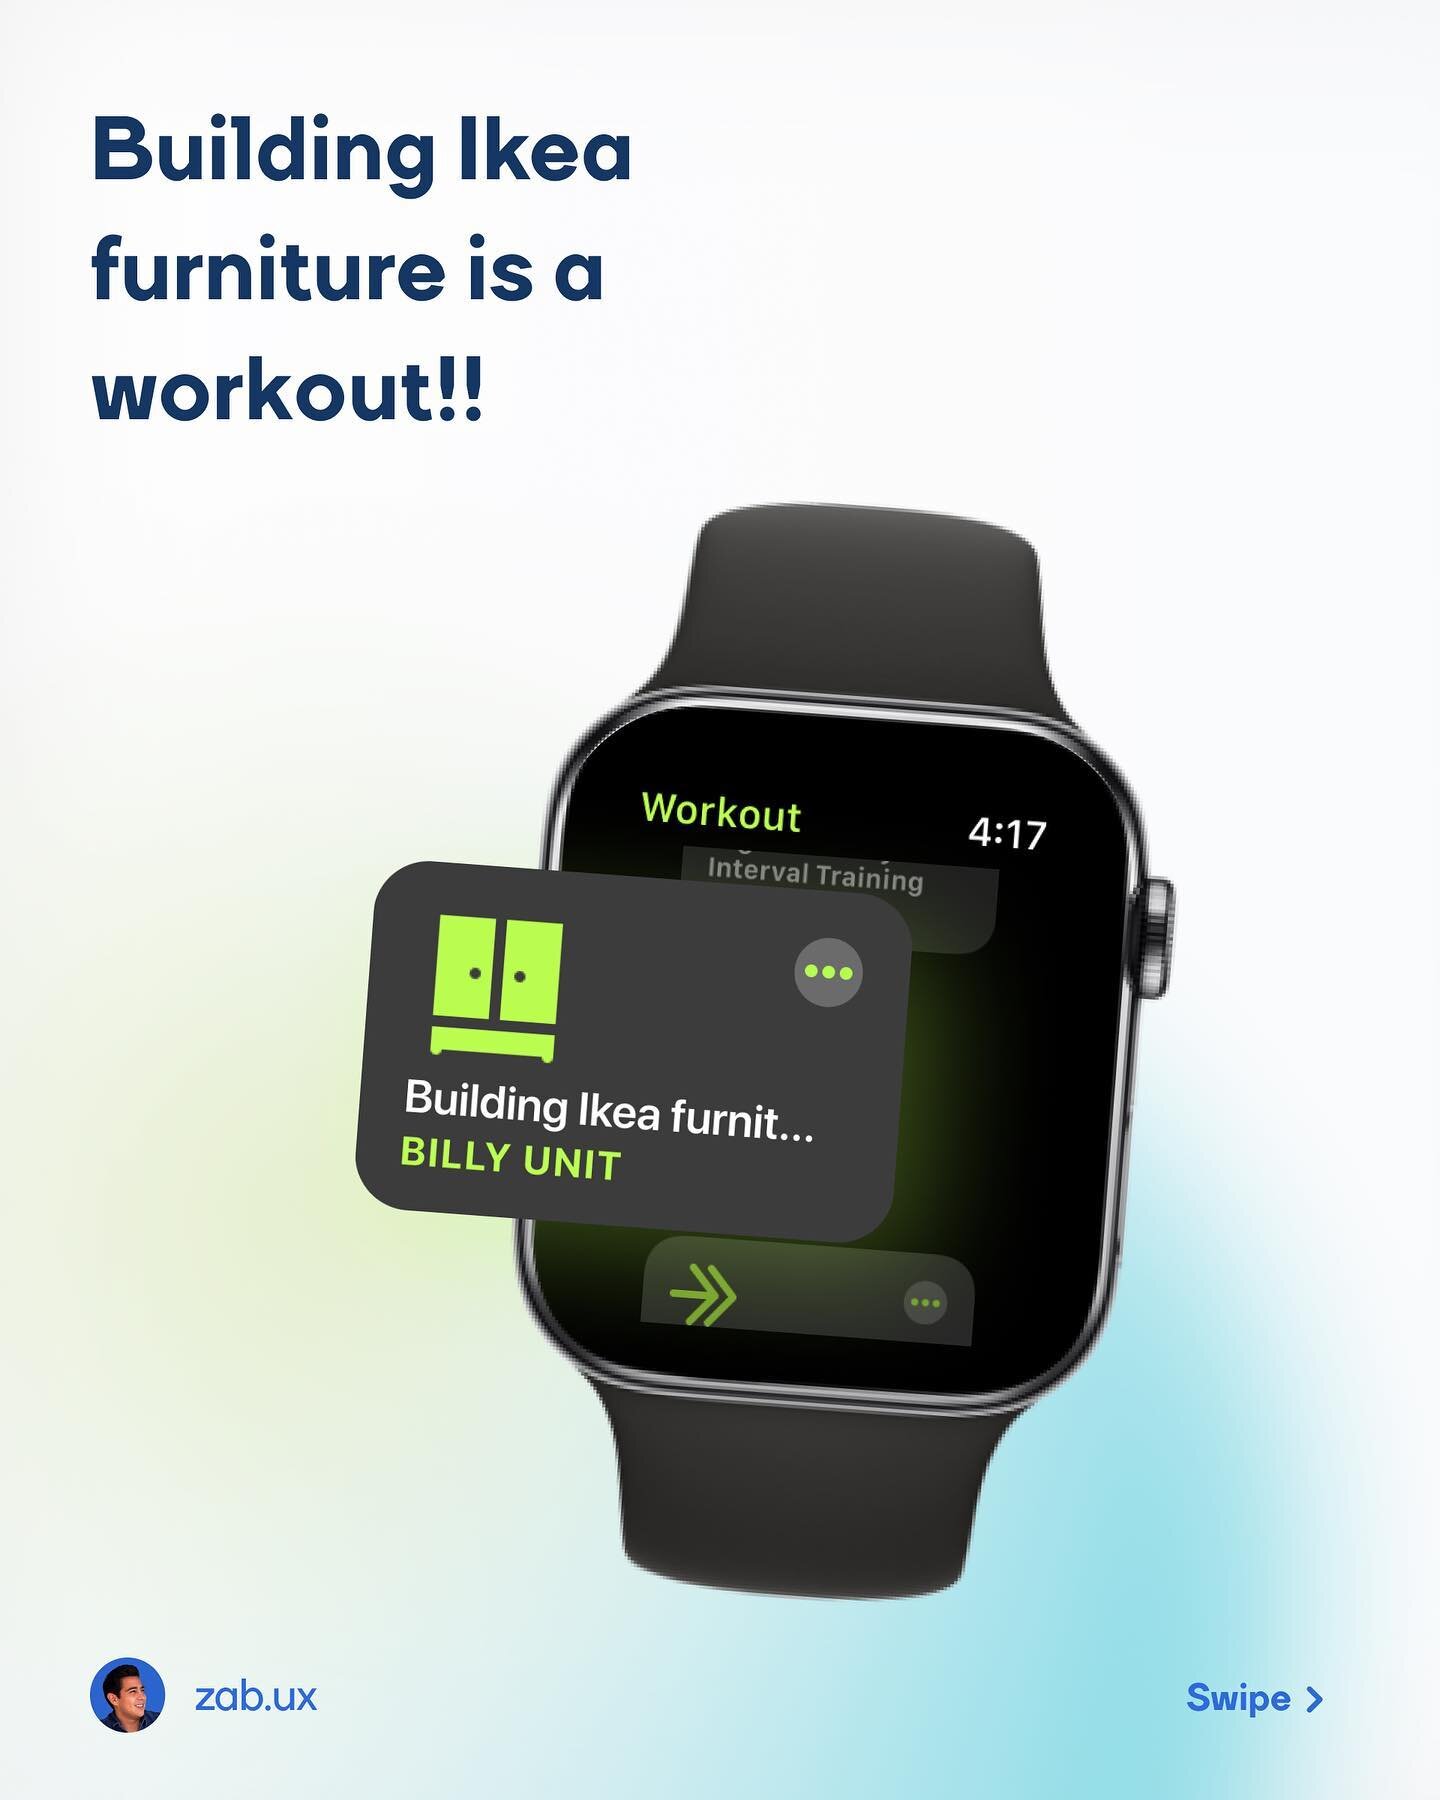 So, What other activities would you considered to be an apple watch workout? 
.
Also let me know if you like these, I may start doing these more story time + random uiux idea mockups.
.
.
Estaba hablando con mis esposa de que otras actividades podr&i